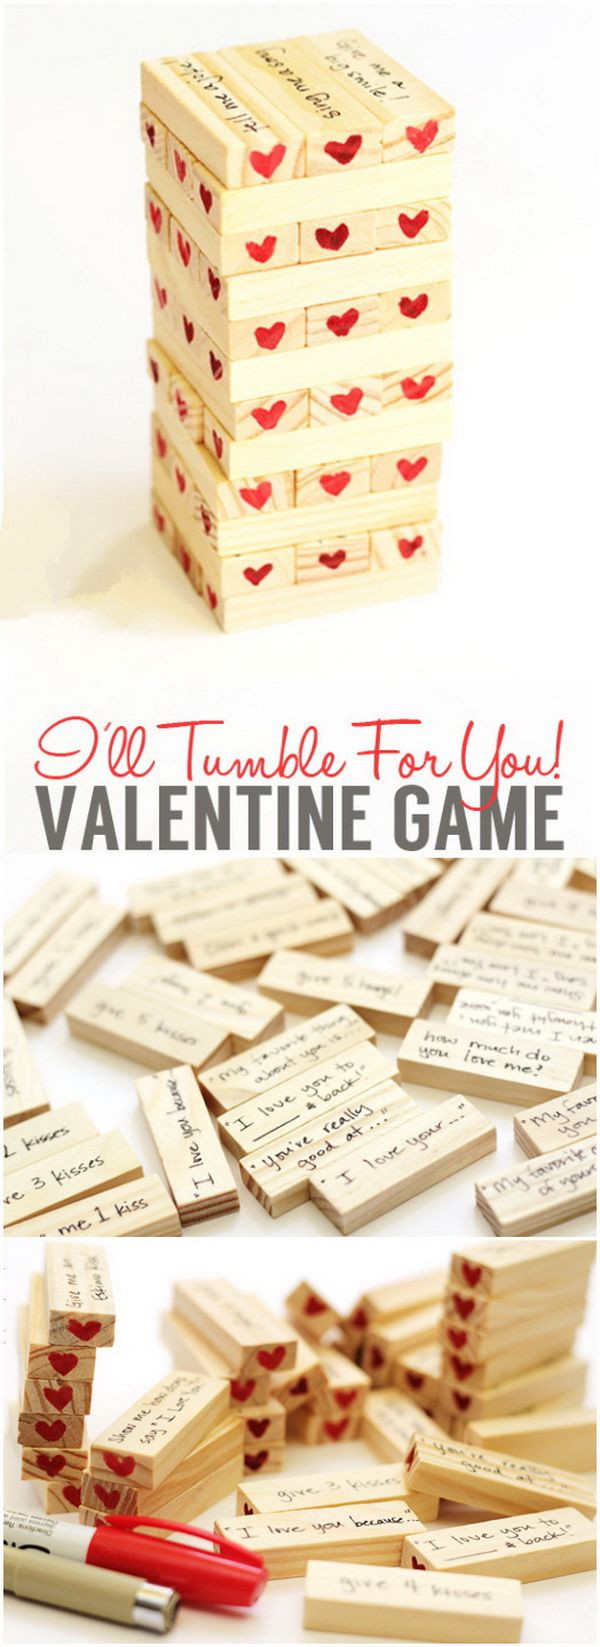 Homemade Valentine Gift Ideas For Boyfriend
 Valentine’s Day Hearty Tumble Game Another fun t idea